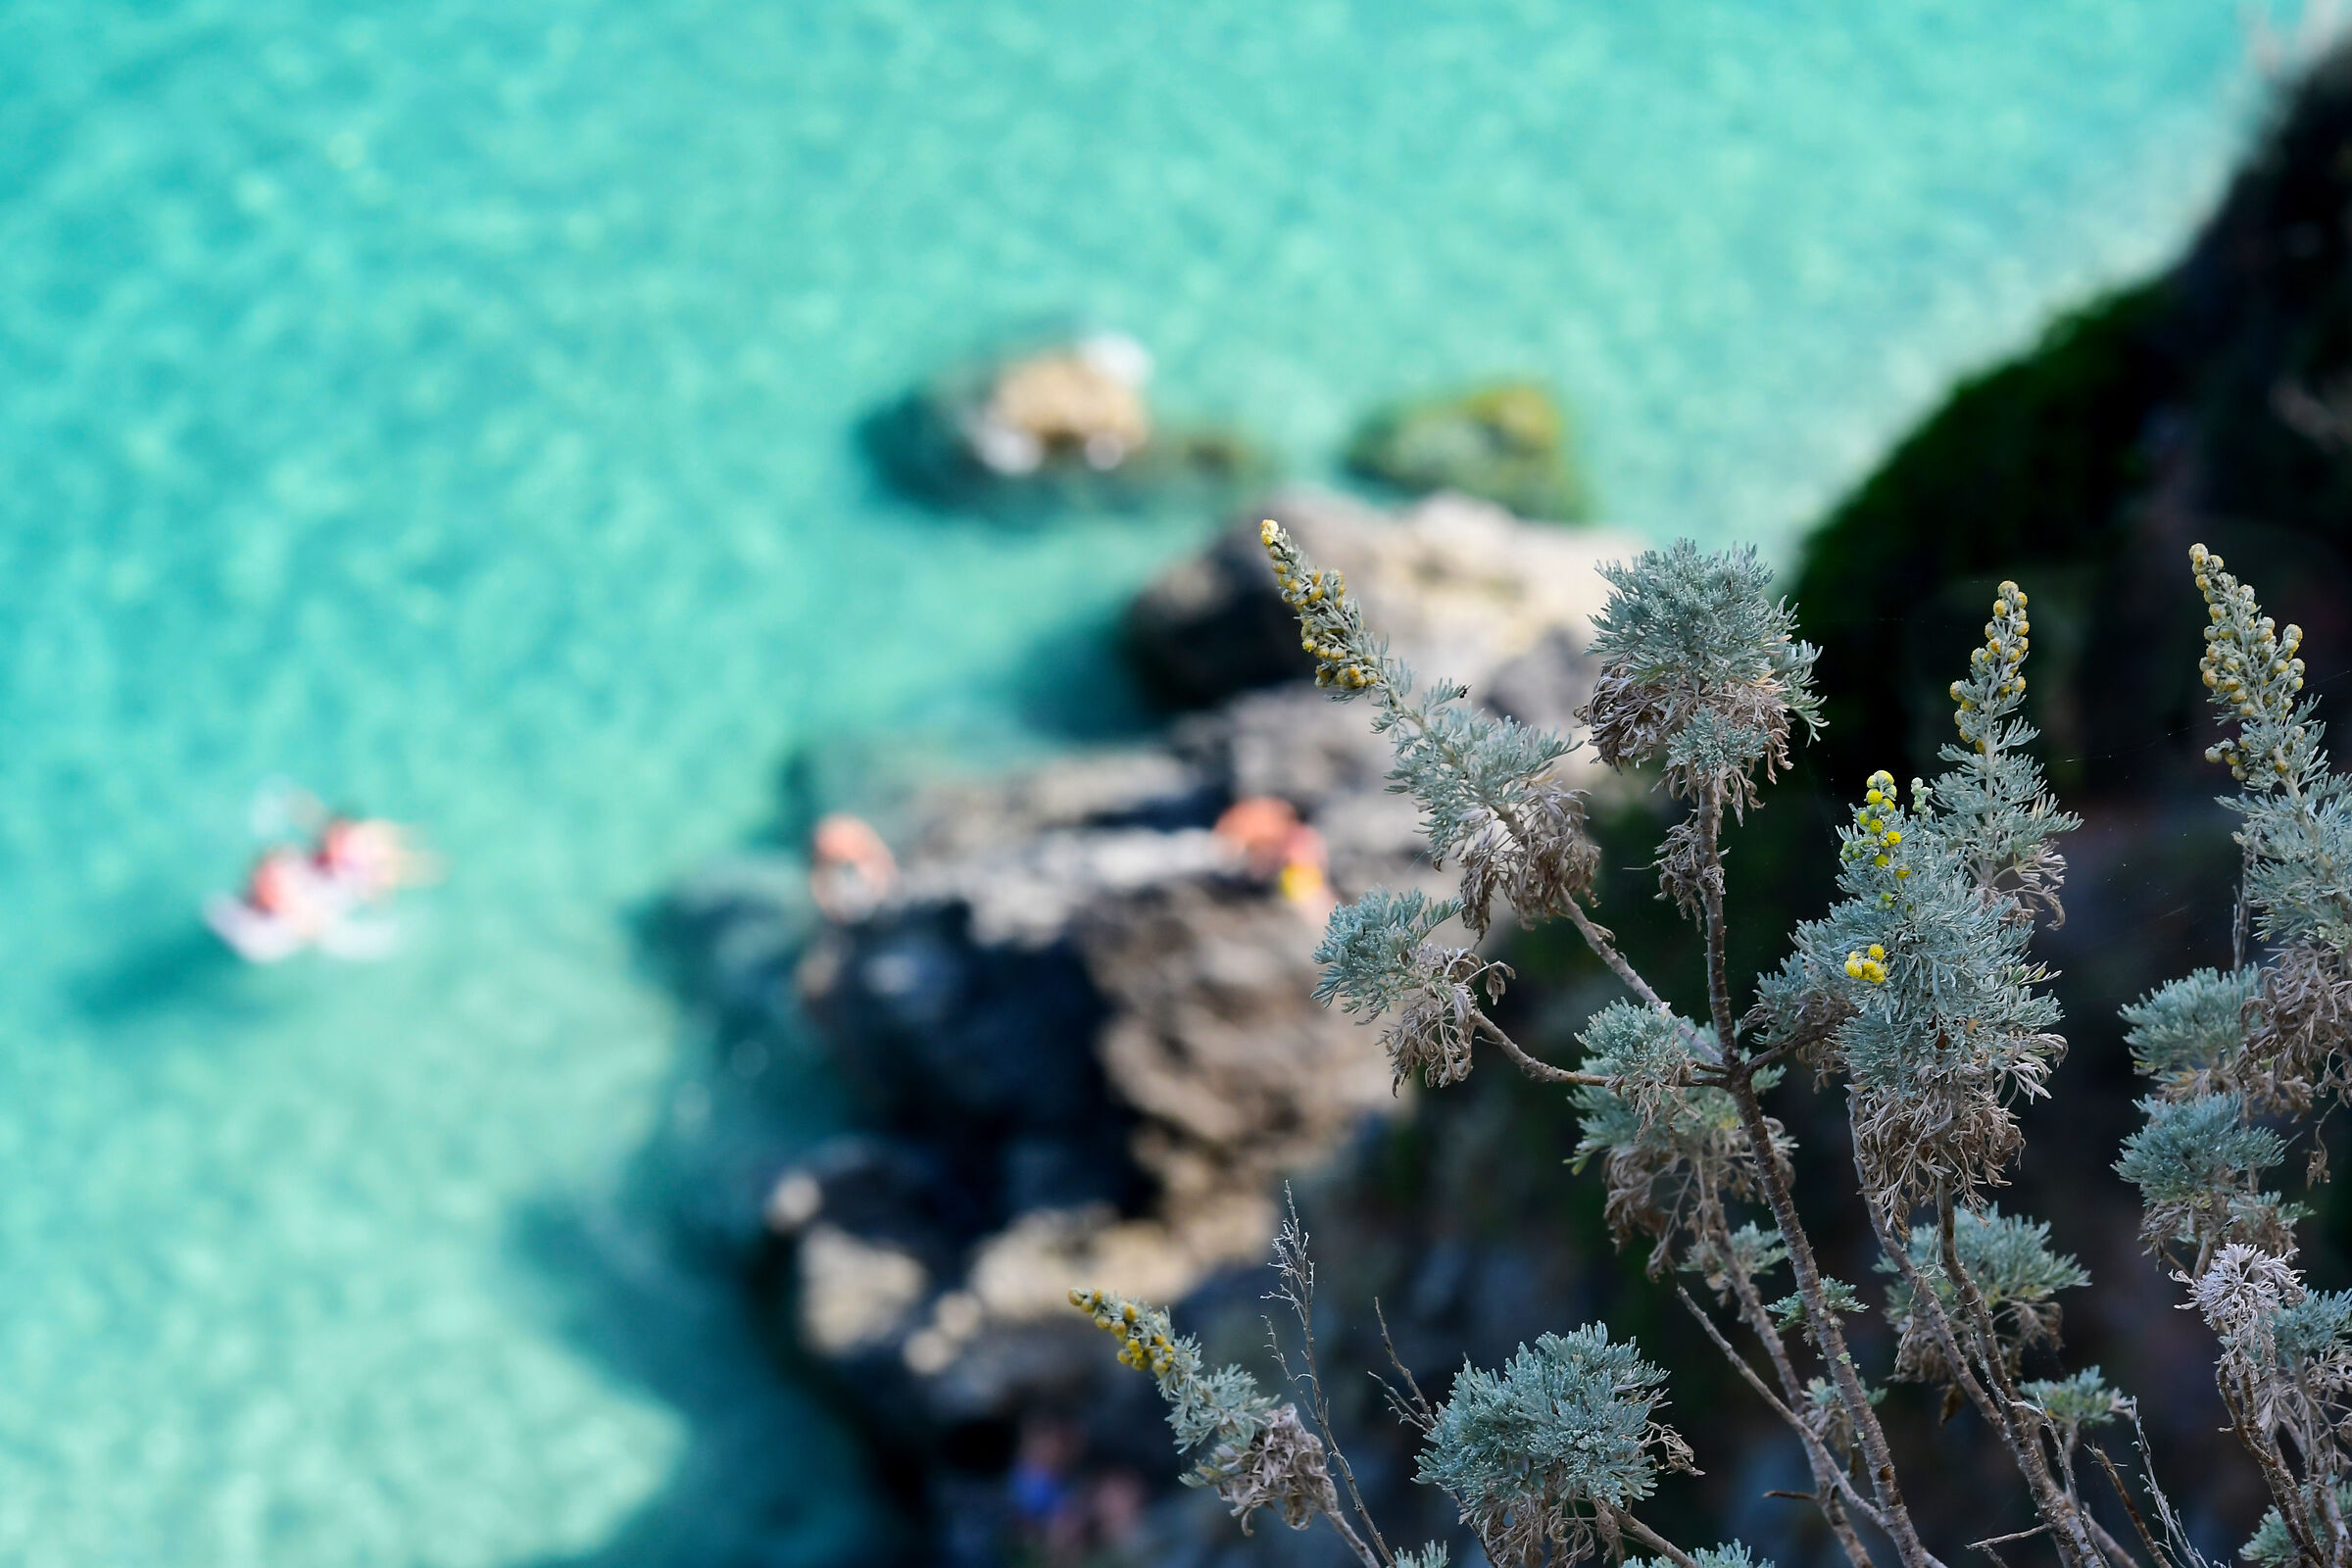 Flowers, sea and more.....